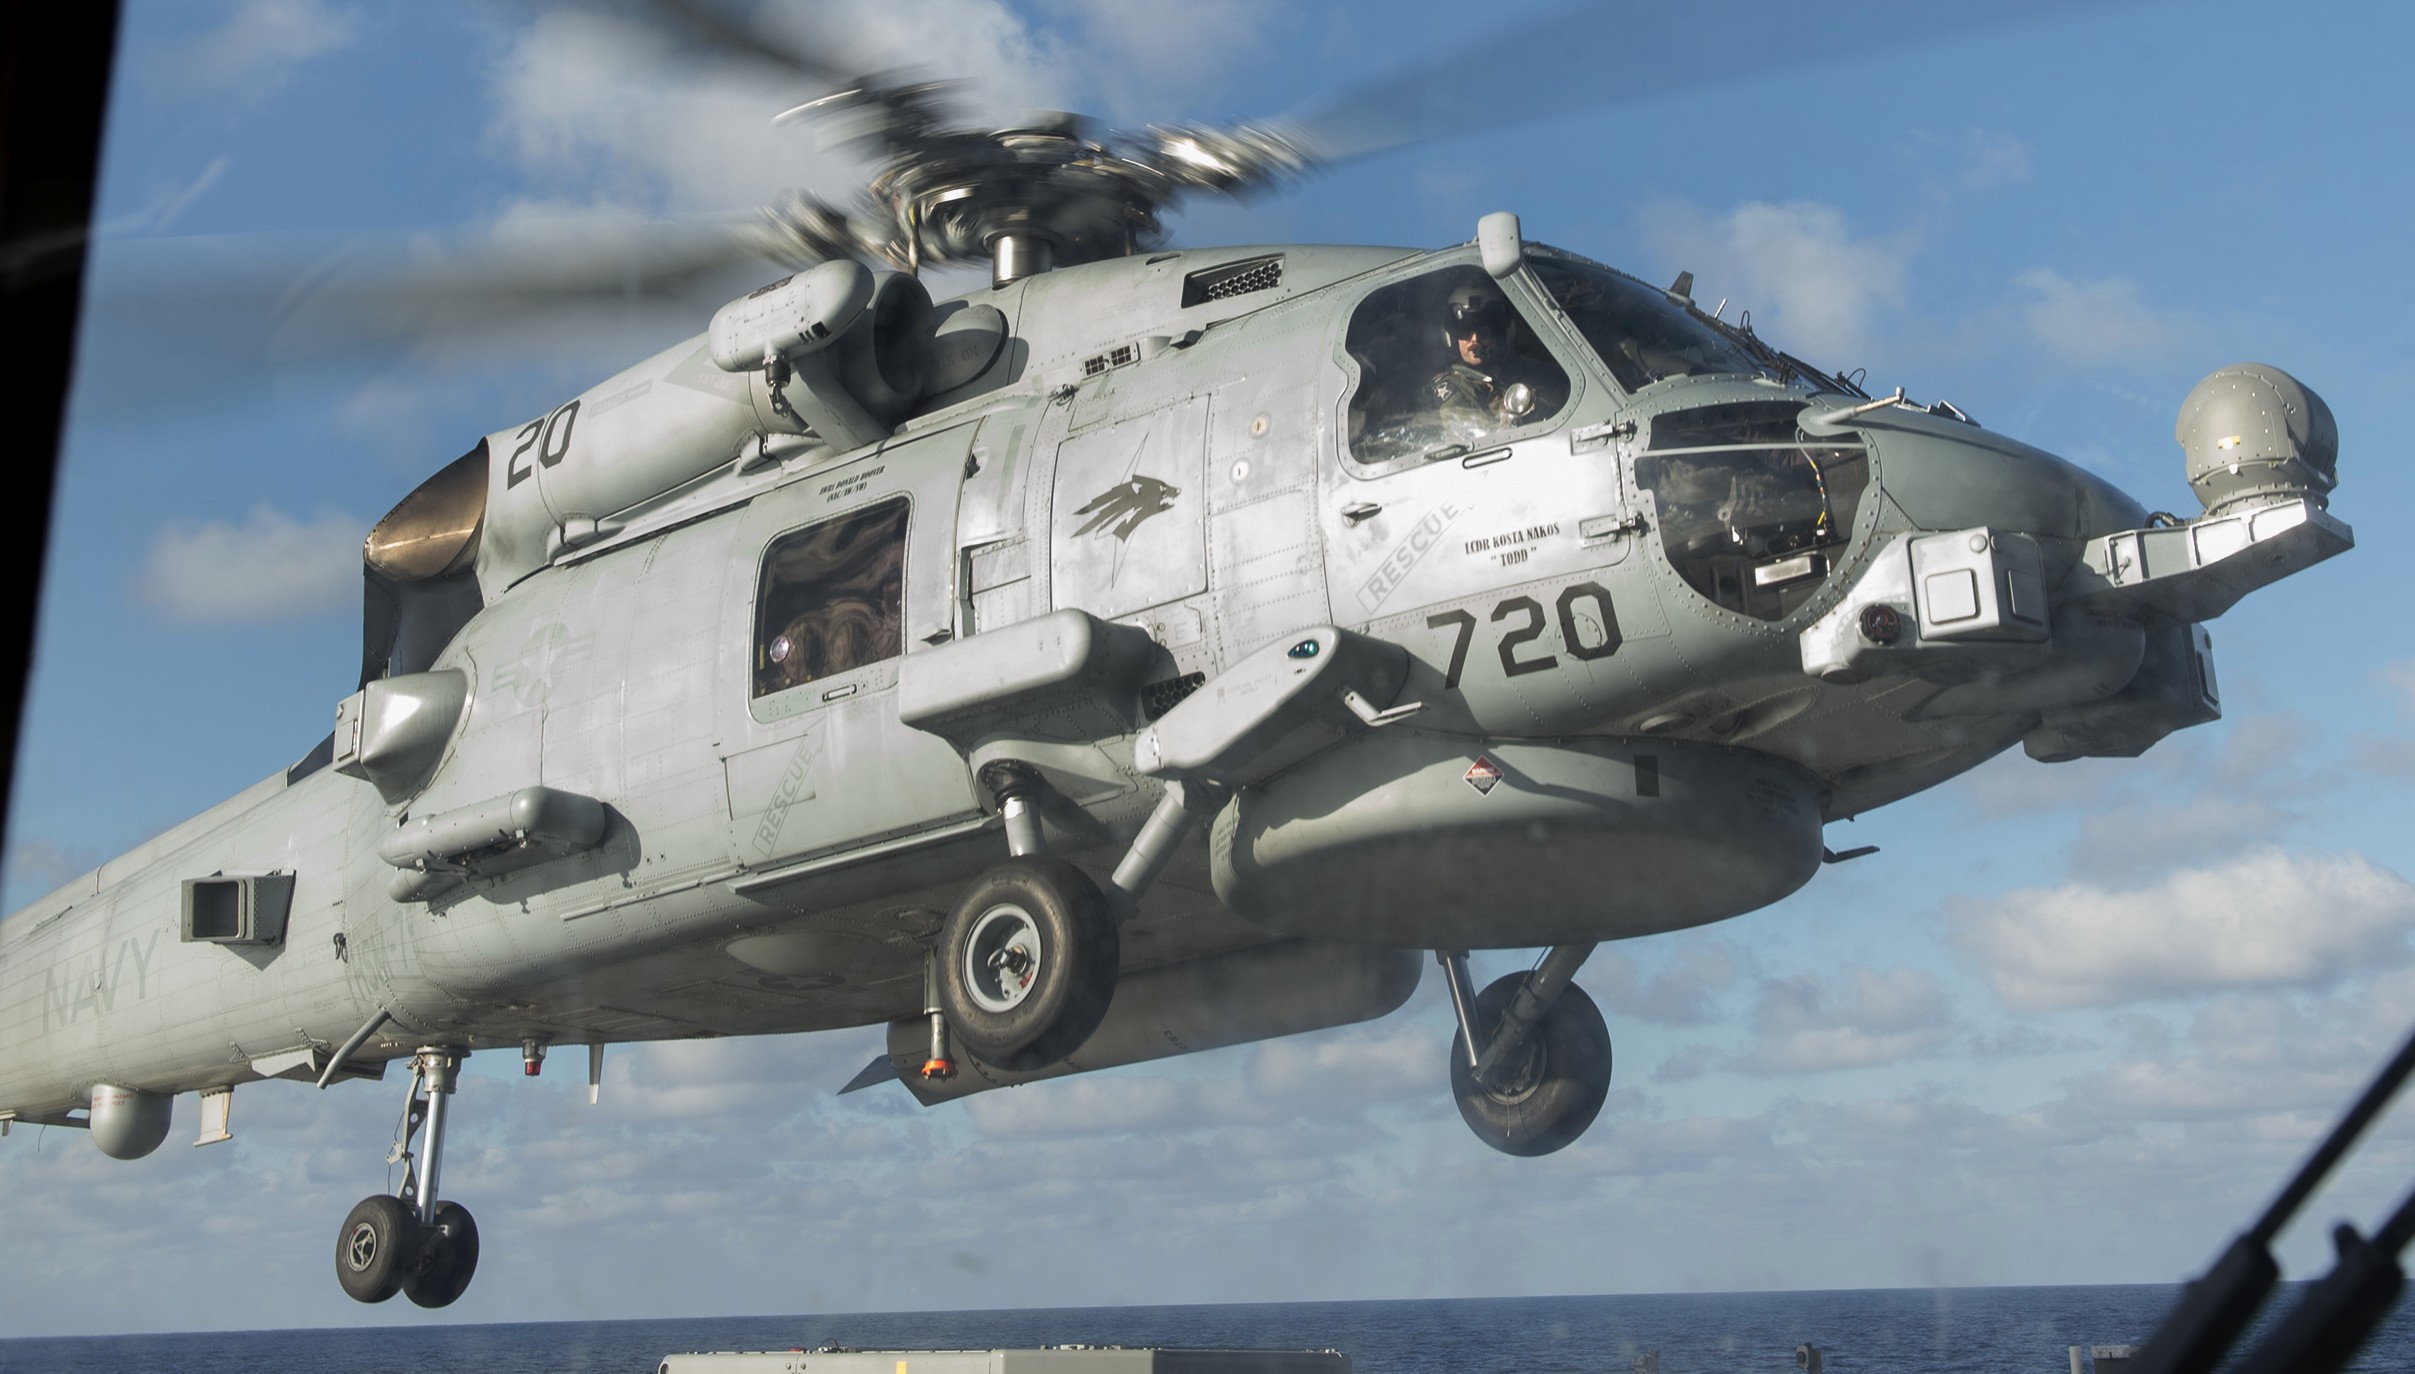 hsm-75 wolf pack helicopter maritime strike squadron mh-60r seahawk cg-62 uss chancellorsville 49